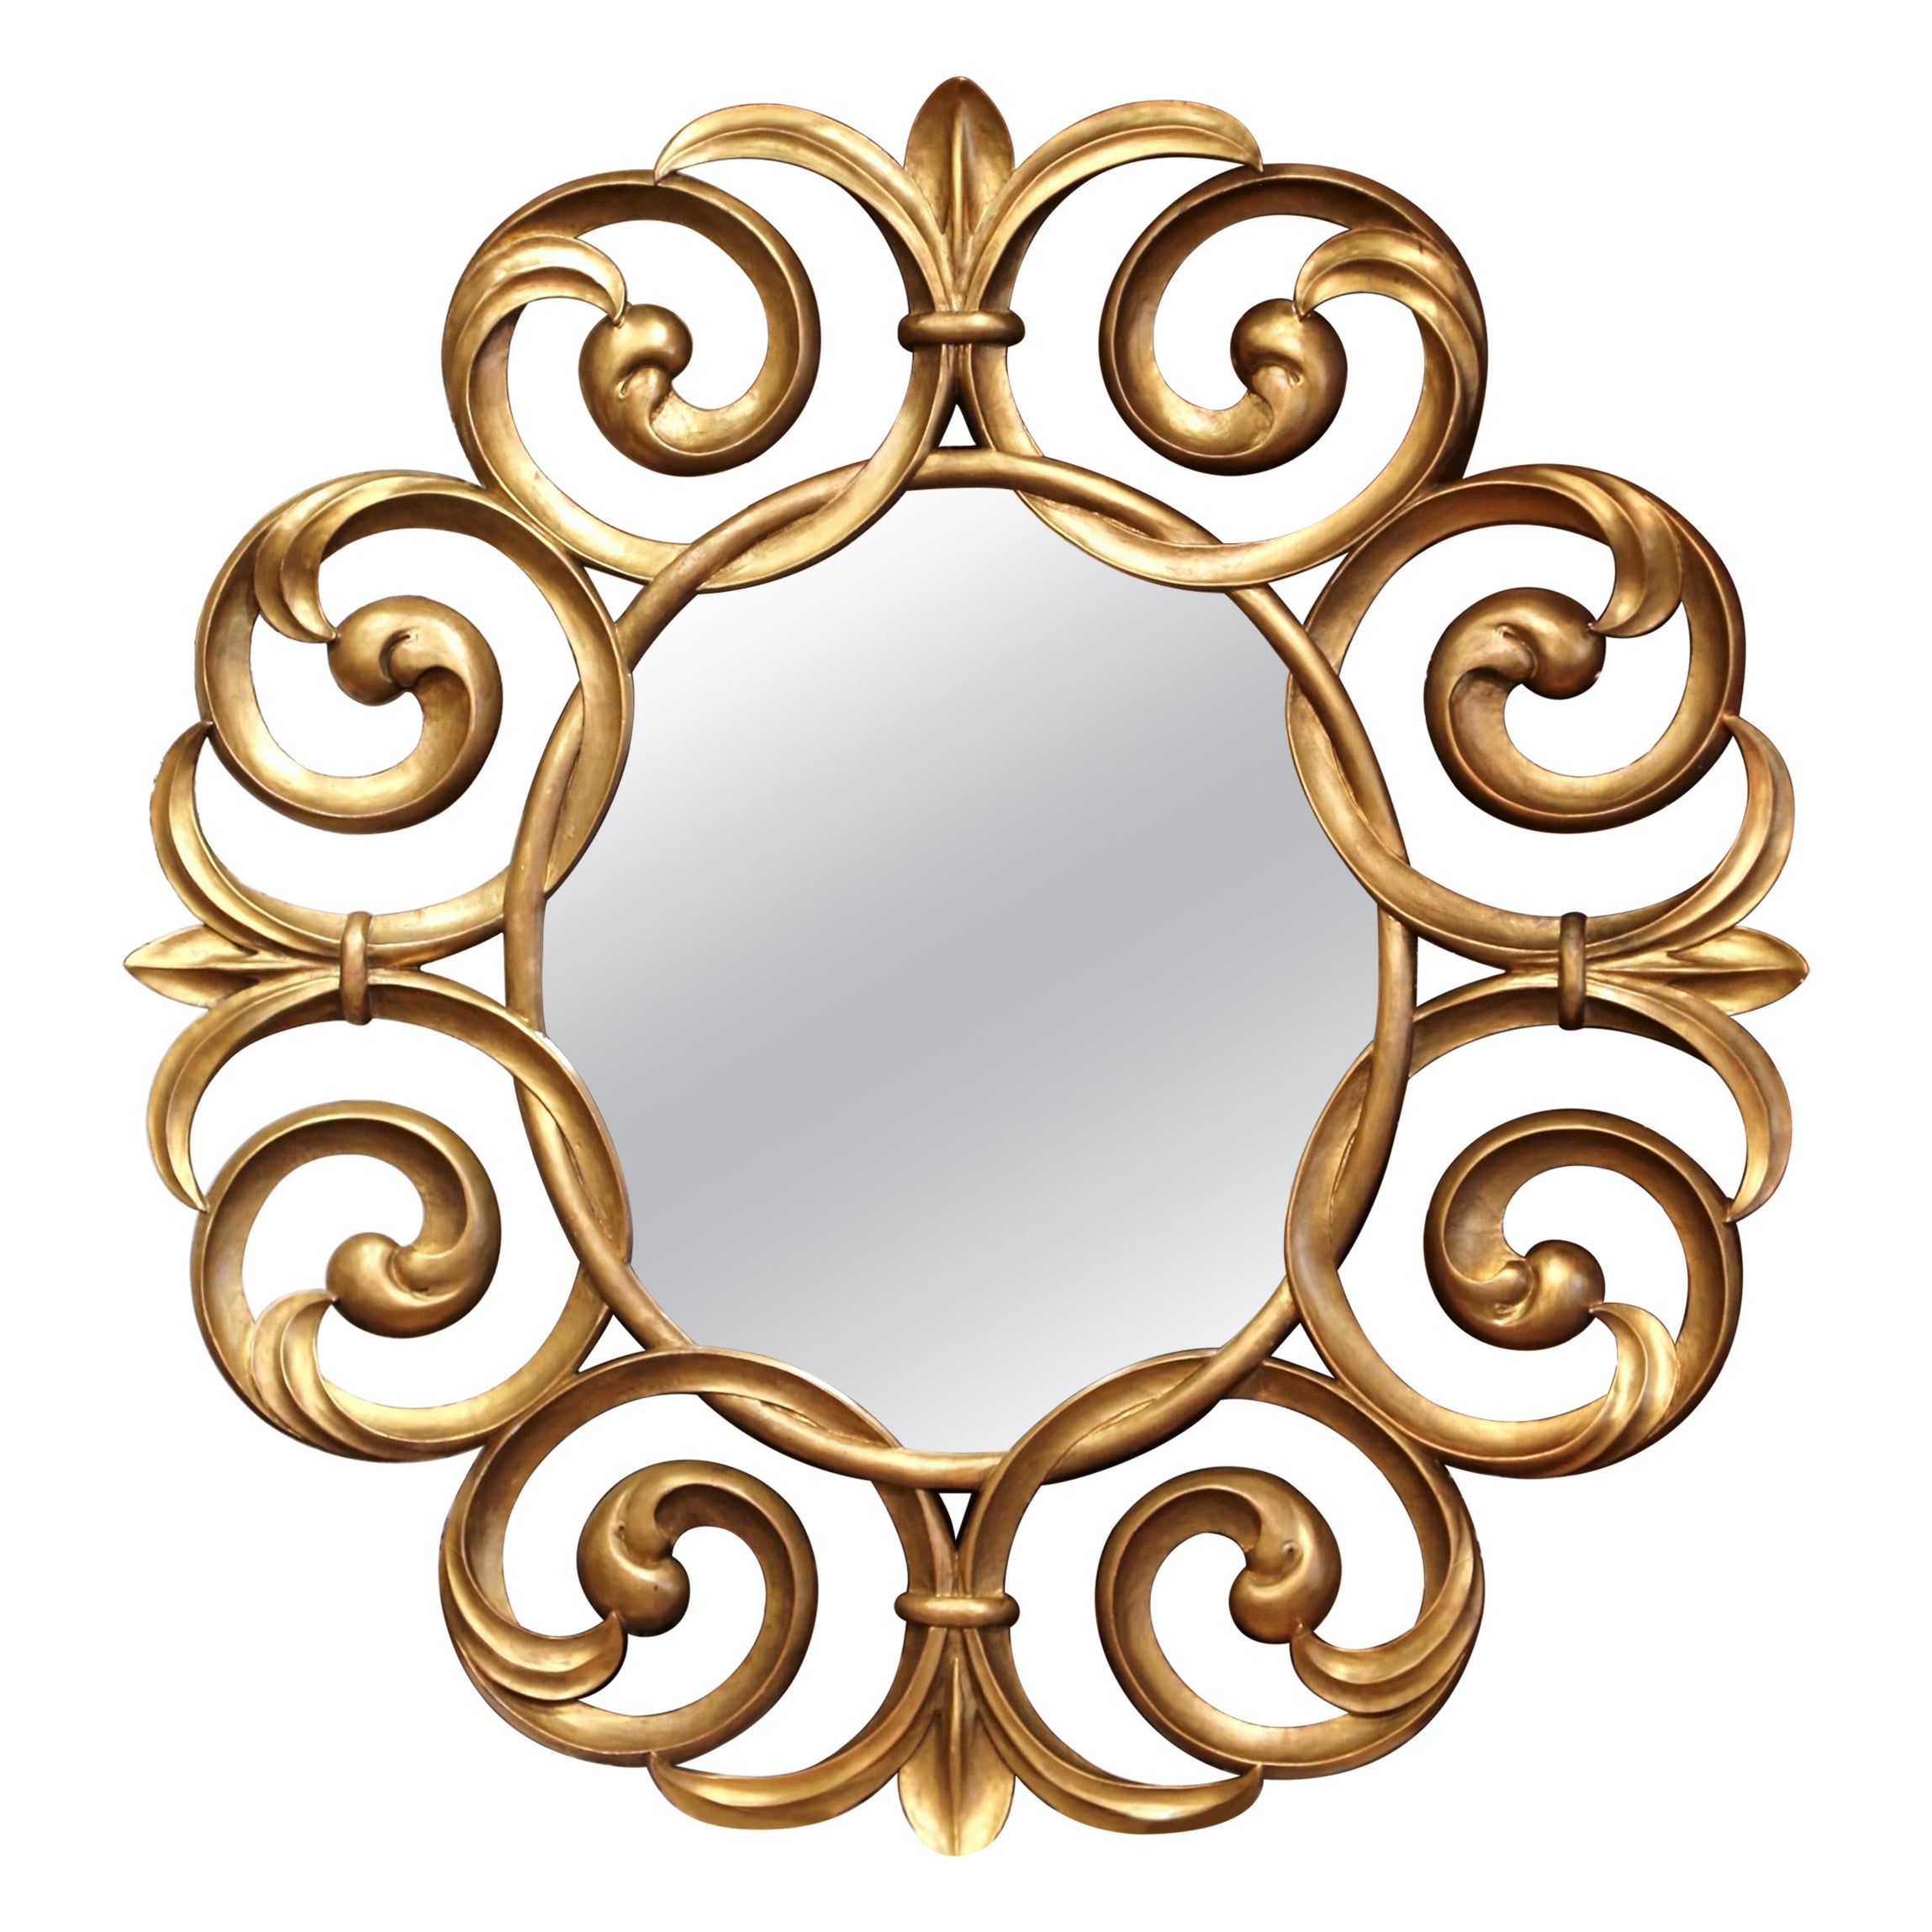 Monumental Early 20th Century French Carved Giltwood Sunburst Mirror For Sale